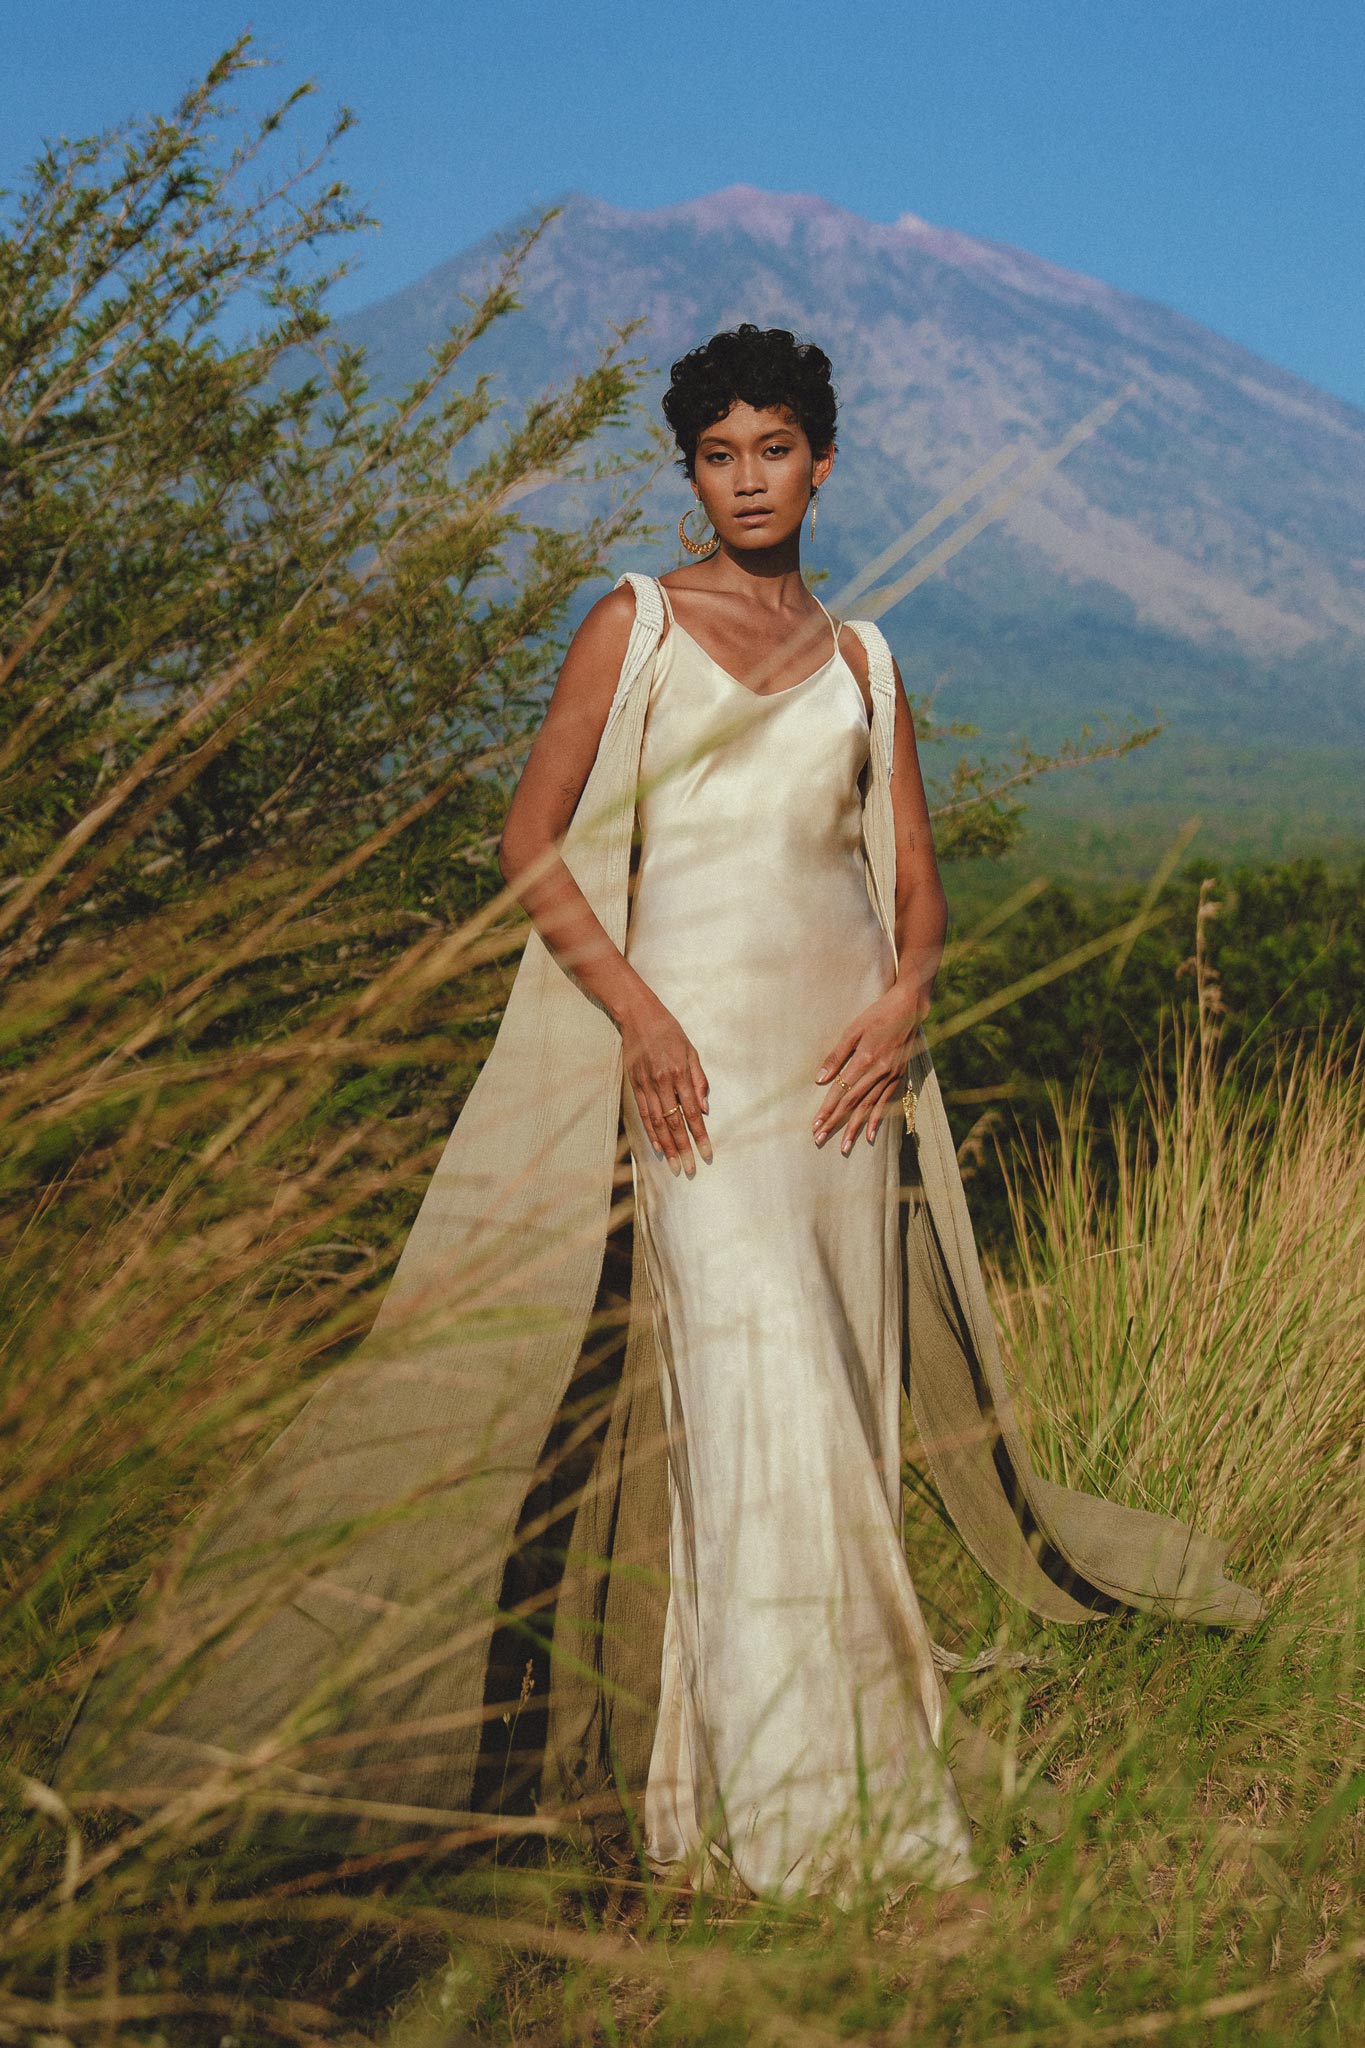 Be the epitome of elegance in this off-white silk wedding dress with a goddess-like vibe.